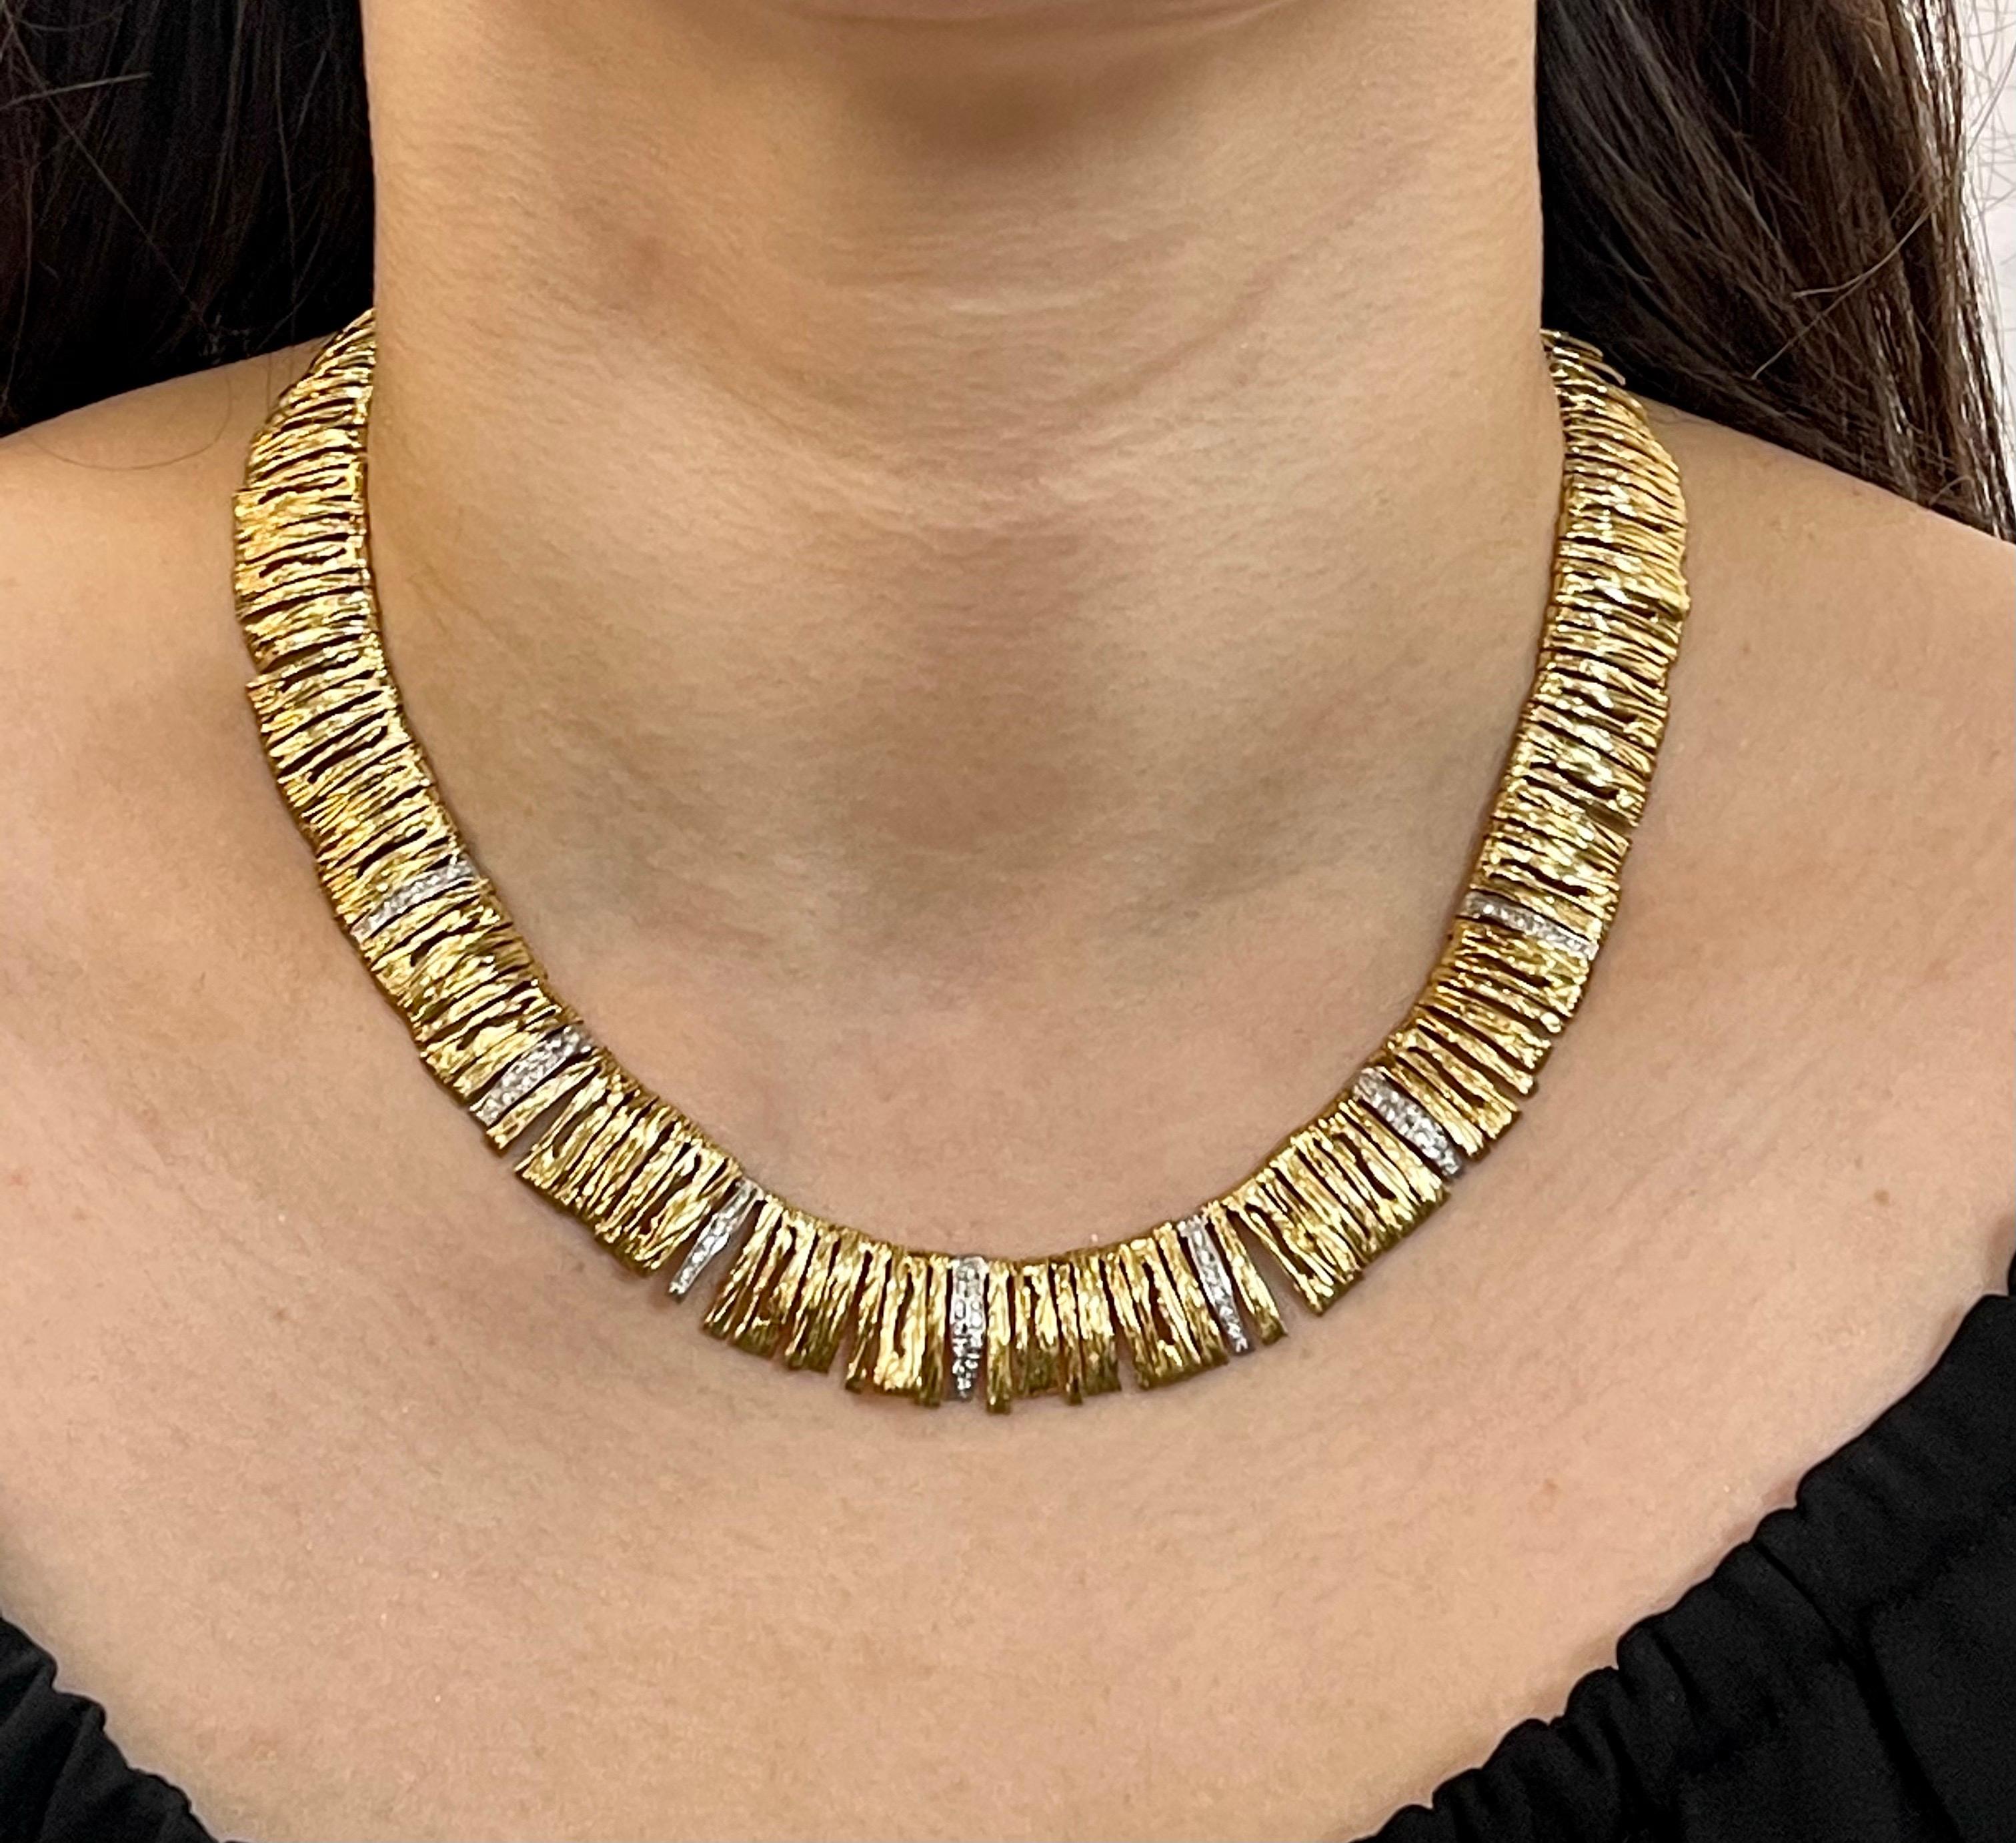 Designer Roberto Coin Diamond Elephant Skin Necklace, 18 Karat Gold 53 Grams In Excellent Condition For Sale In New York, NY